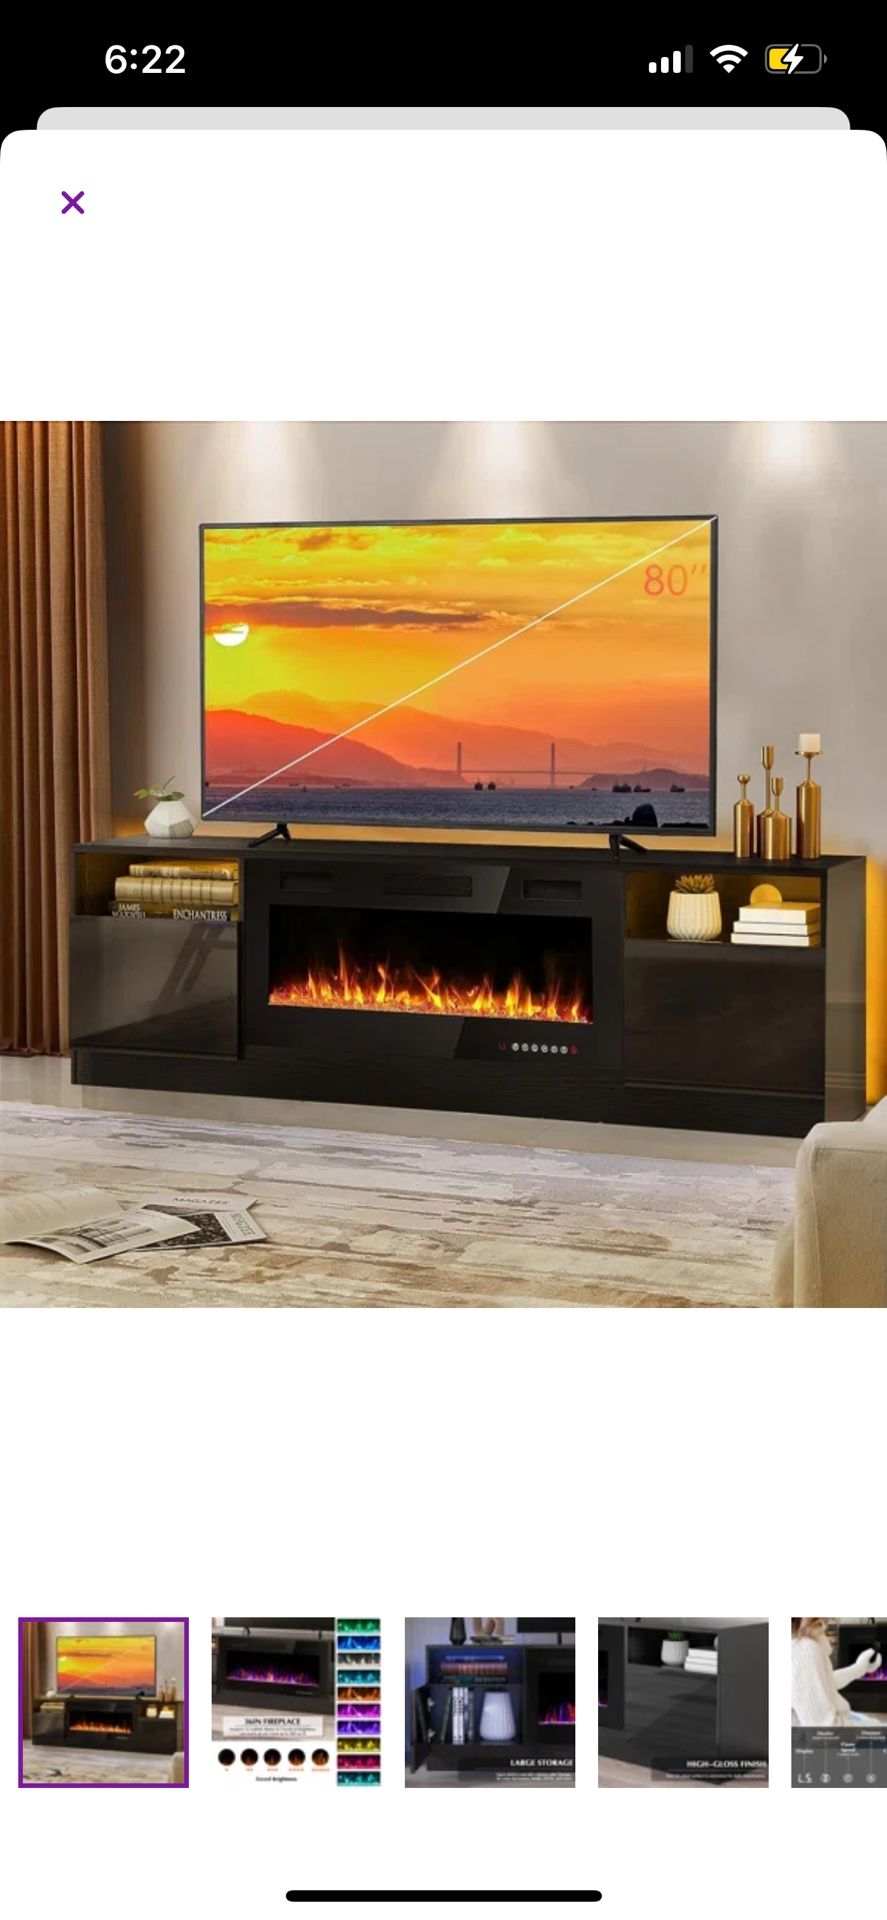 Fireplace Tv Stand Up To 78 Inch